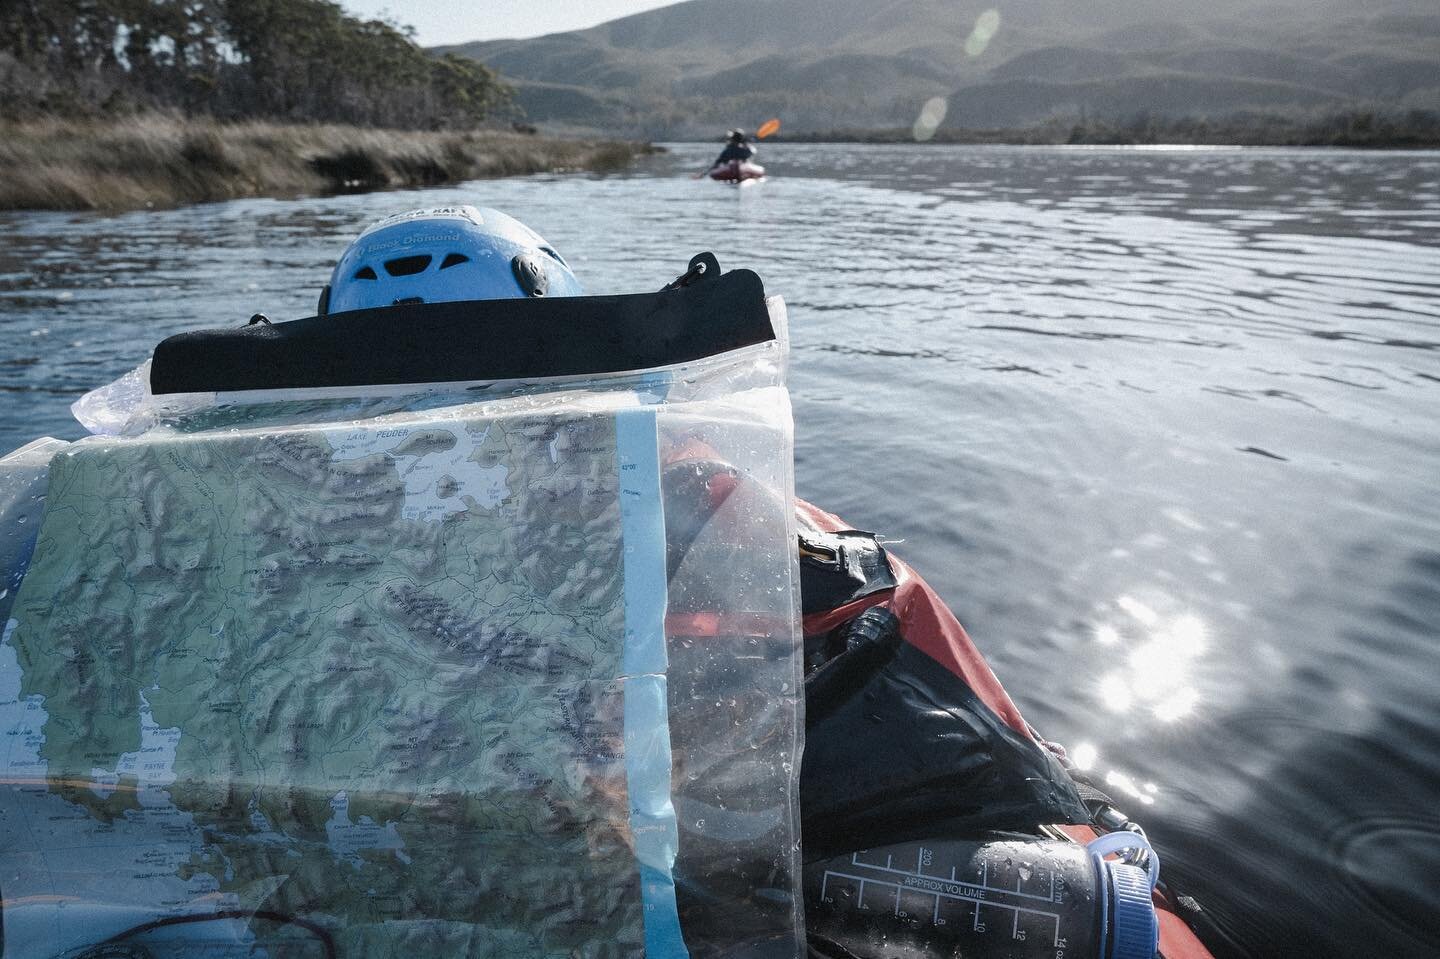 &gt;
Contours on a map. 

Brooding seas. 

Steam from a pot, river camp. 

Packrafting is&hellip; 

Journey near. Journey far. 

Where will you discover&hellip;?
.
.
.
#thisispackrafting #packraftaustralia #packrafting #packrafts #packraft #alpackara